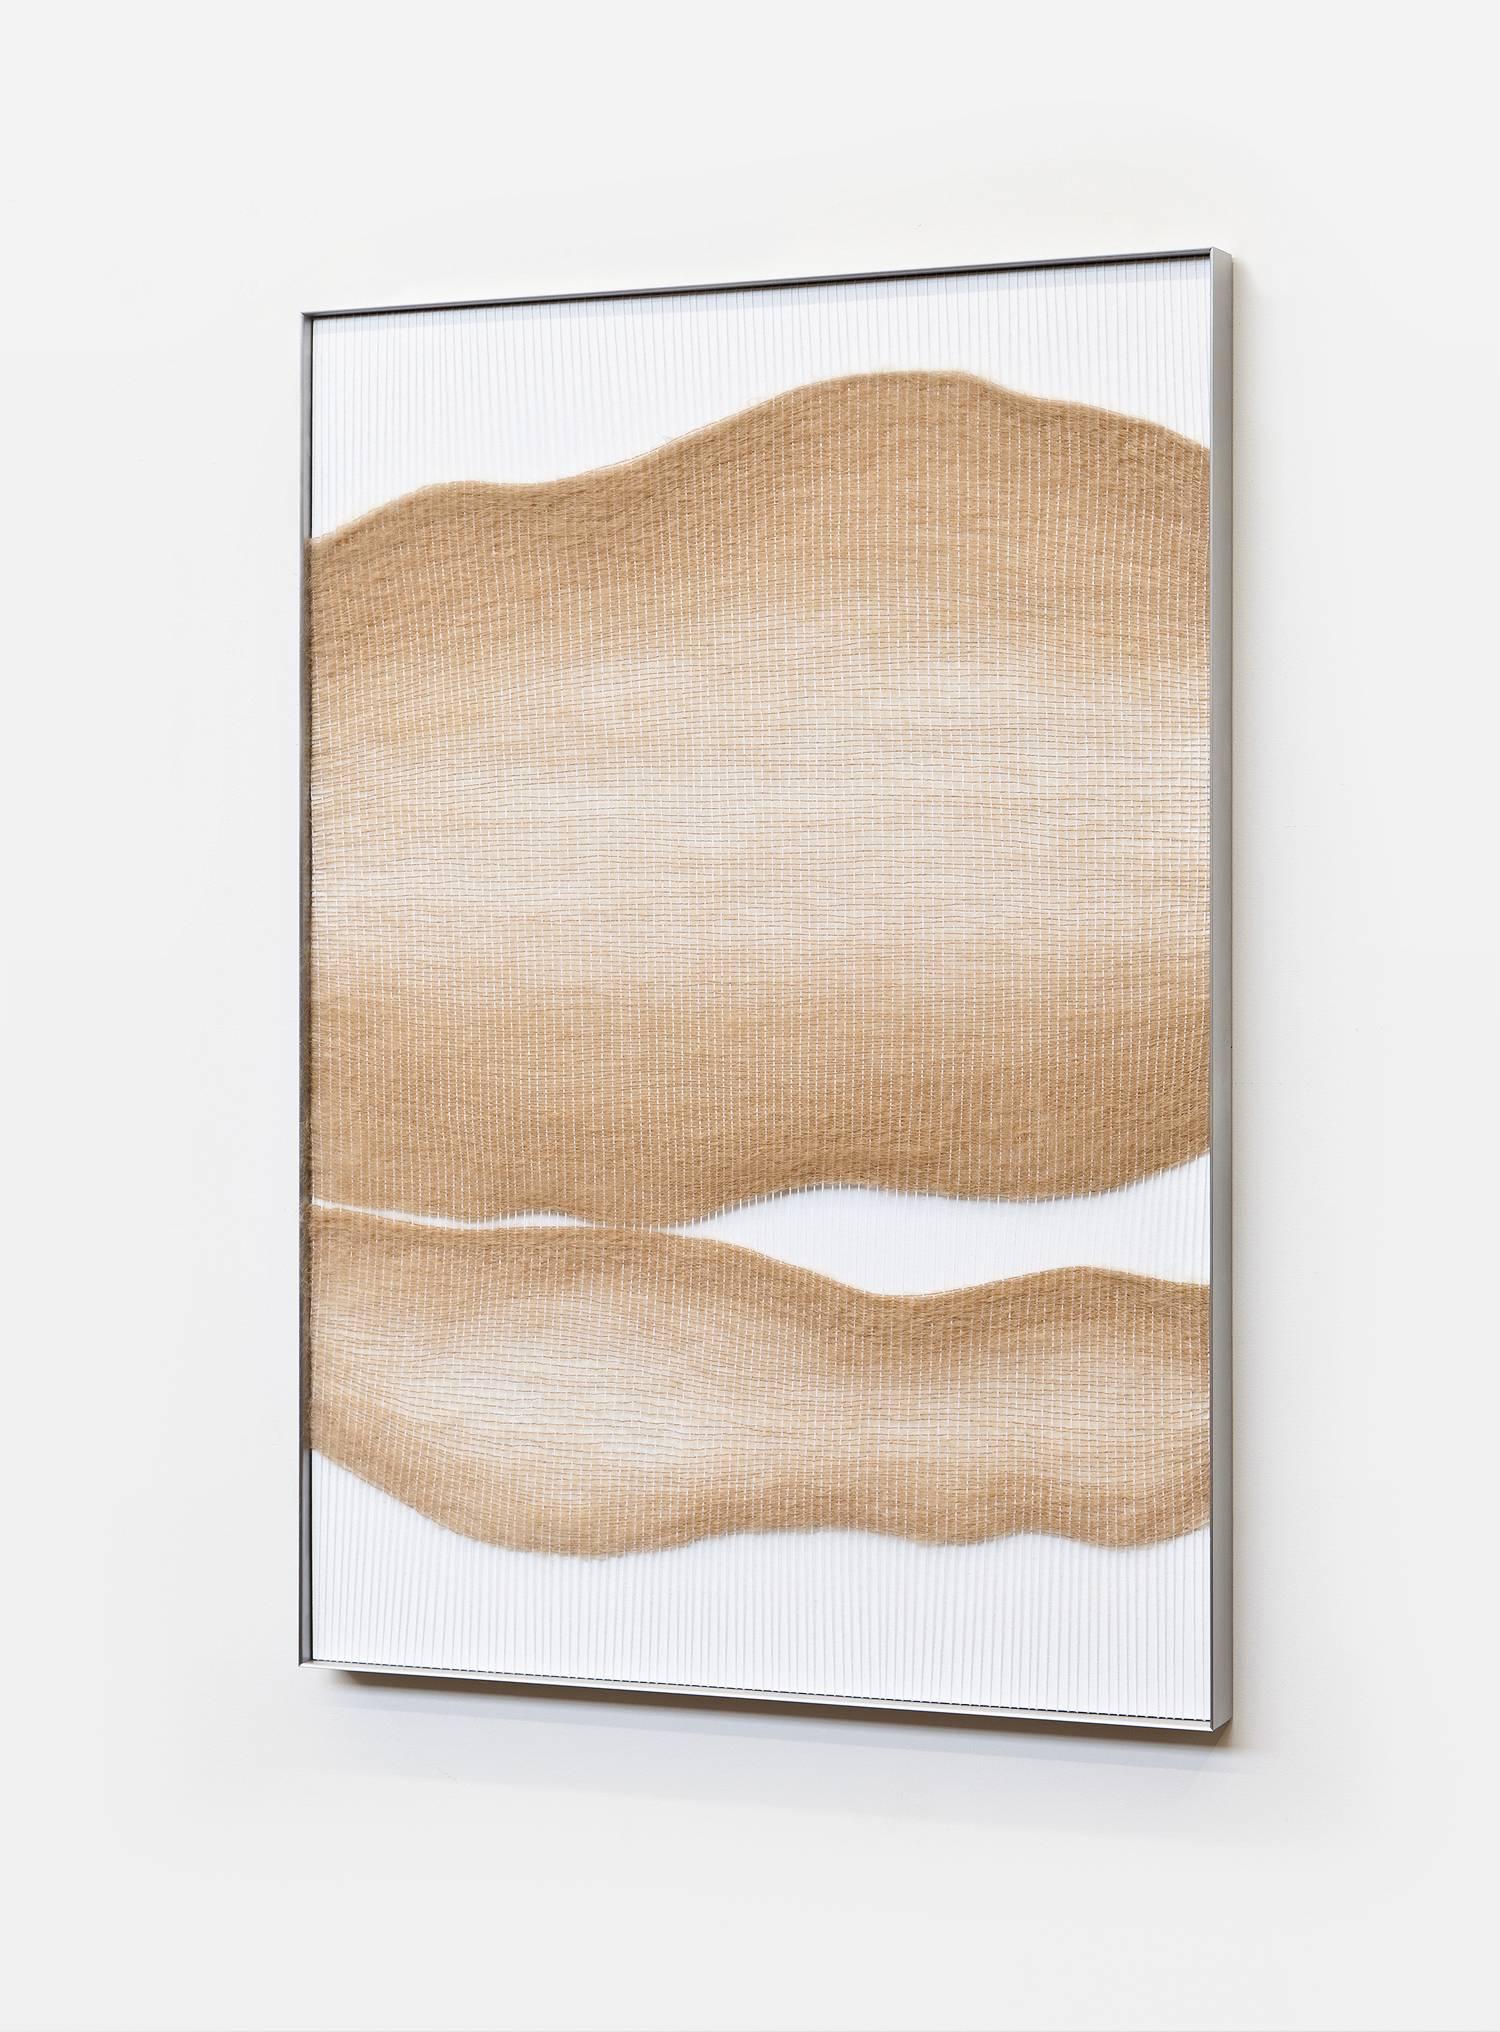 Tan live edge forms
Natural fibers, plywood and aluminium frame
Measures: 30” x 44” x 2”
2018
Colors: Taupe and white
Frame: Solid aluminium
Materials: Mohair, cotton, plywood and aluminium
Contemporary fiber art, weaving
Tapestry
This